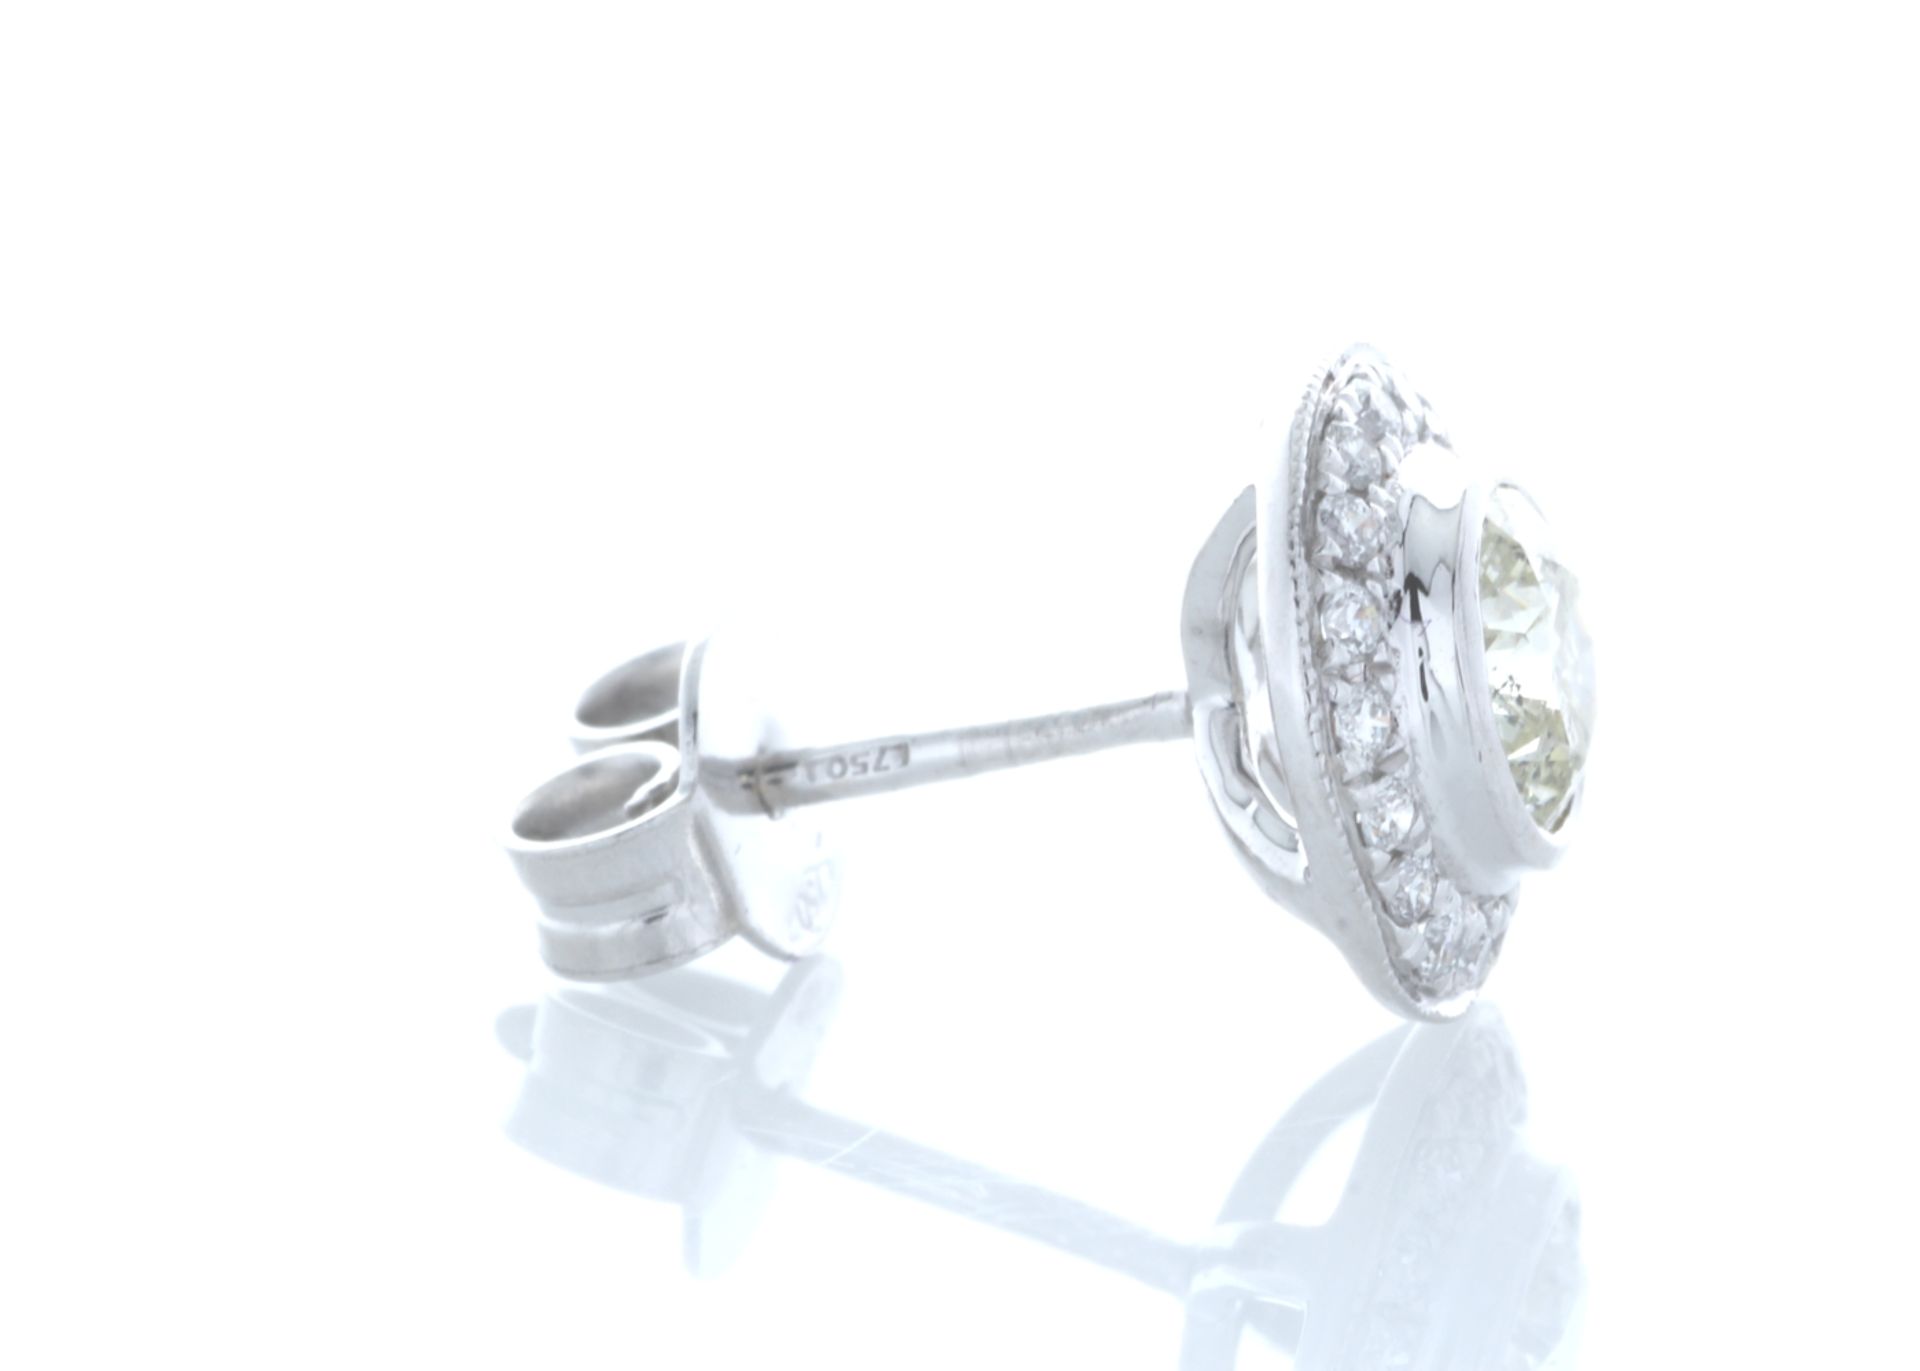 18ct White Gold Single Stone With Halo Setting Earring (1.01) 1.20 Carats - Valued by IDI £9,000. - Image 3 of 4